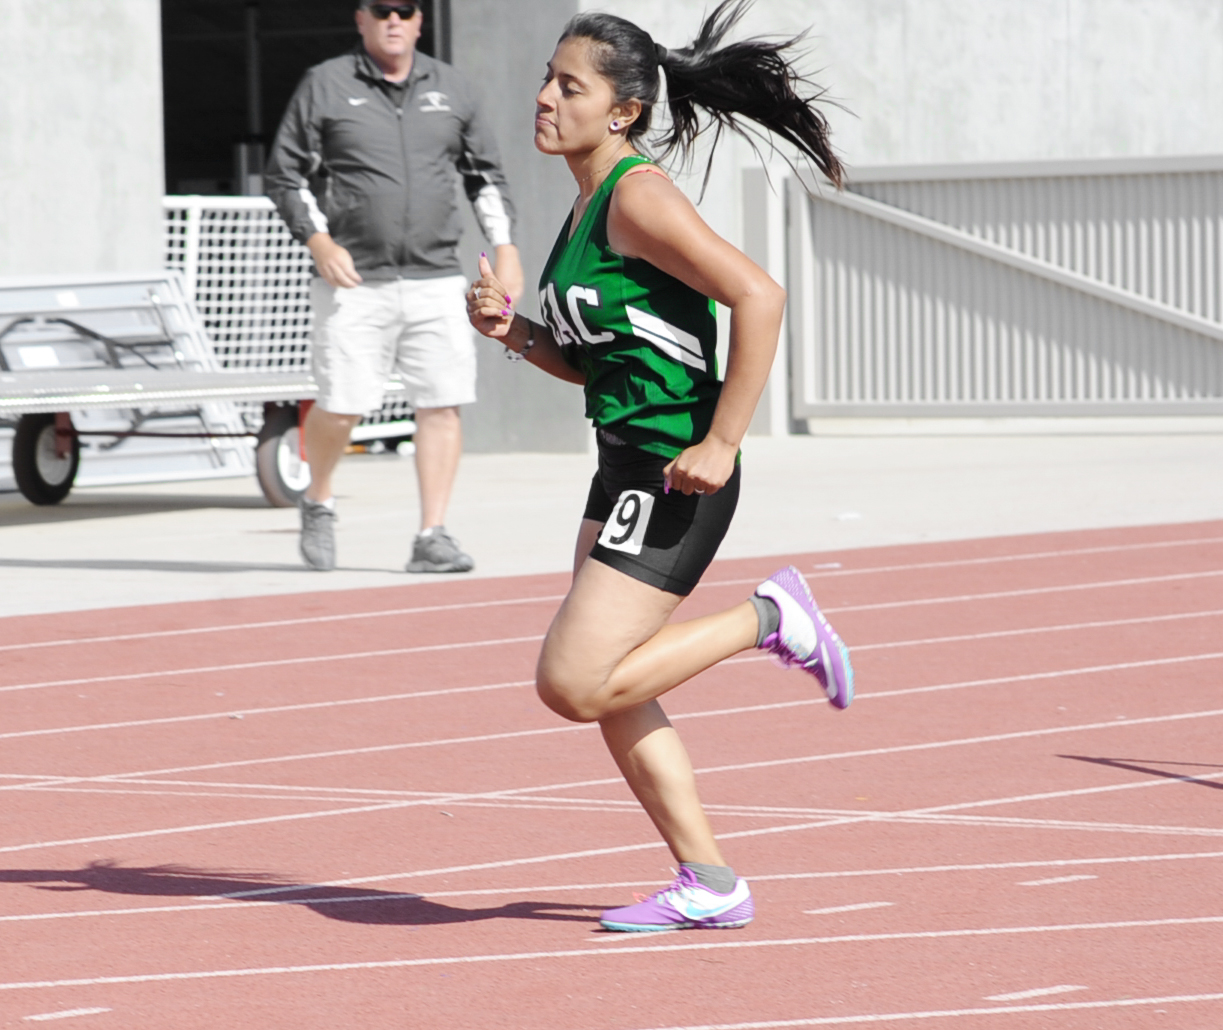 Freshman Yesenia Carias, pictured, of the East Los Angeles College Women's T&F team ran a personal record today in the 800-meter run in the SCC Prelims and moves on to the SCC Championships on Friday, April 27. (Photo by Tadzio Garcia)